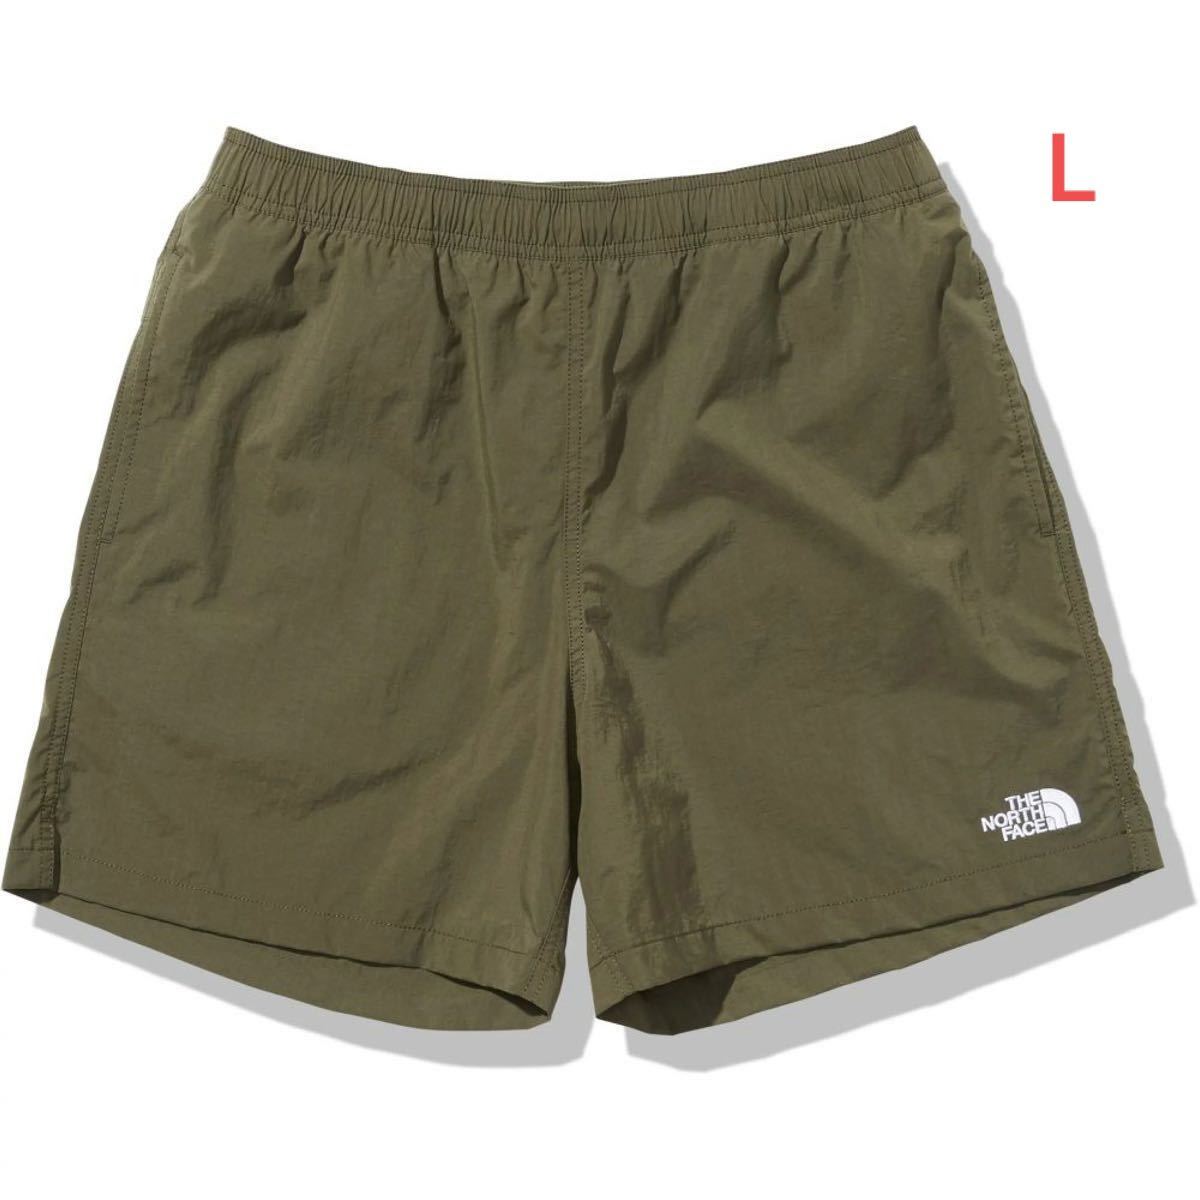 PayPayフリマ｜【新品未使用】The North Face Versatile Short NB42051 NT L